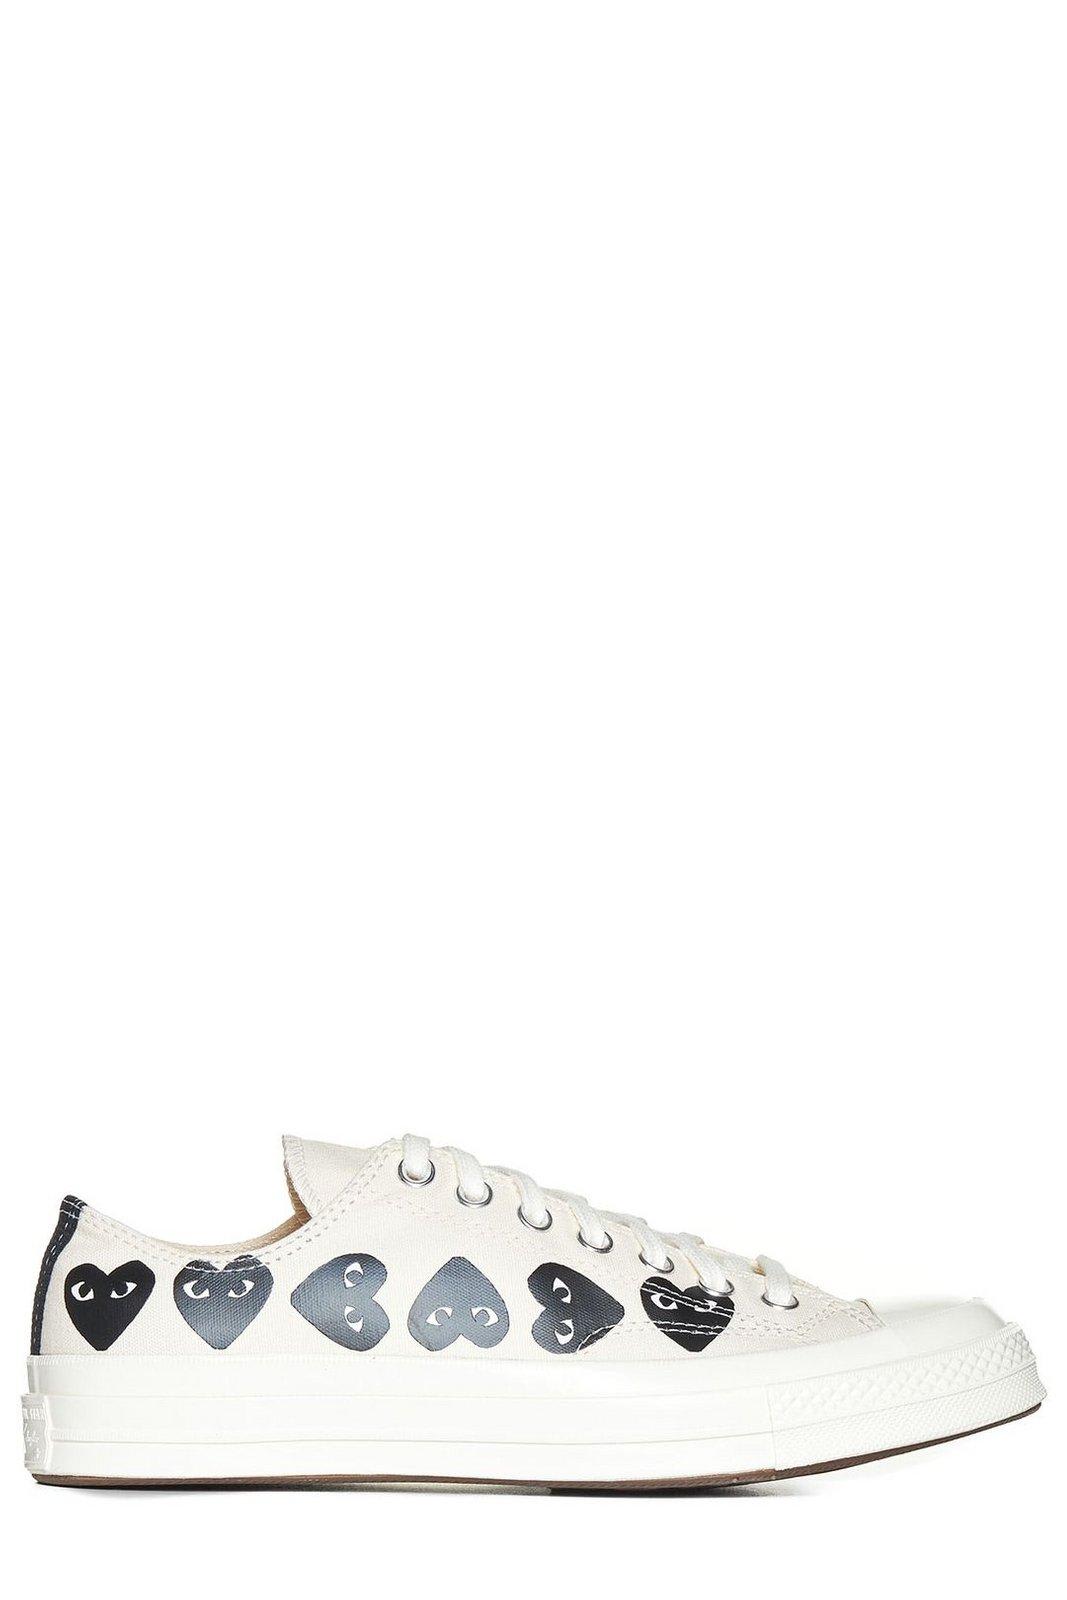 Comme des Garçons Play Heart Logo Printed Low-top Sneakers